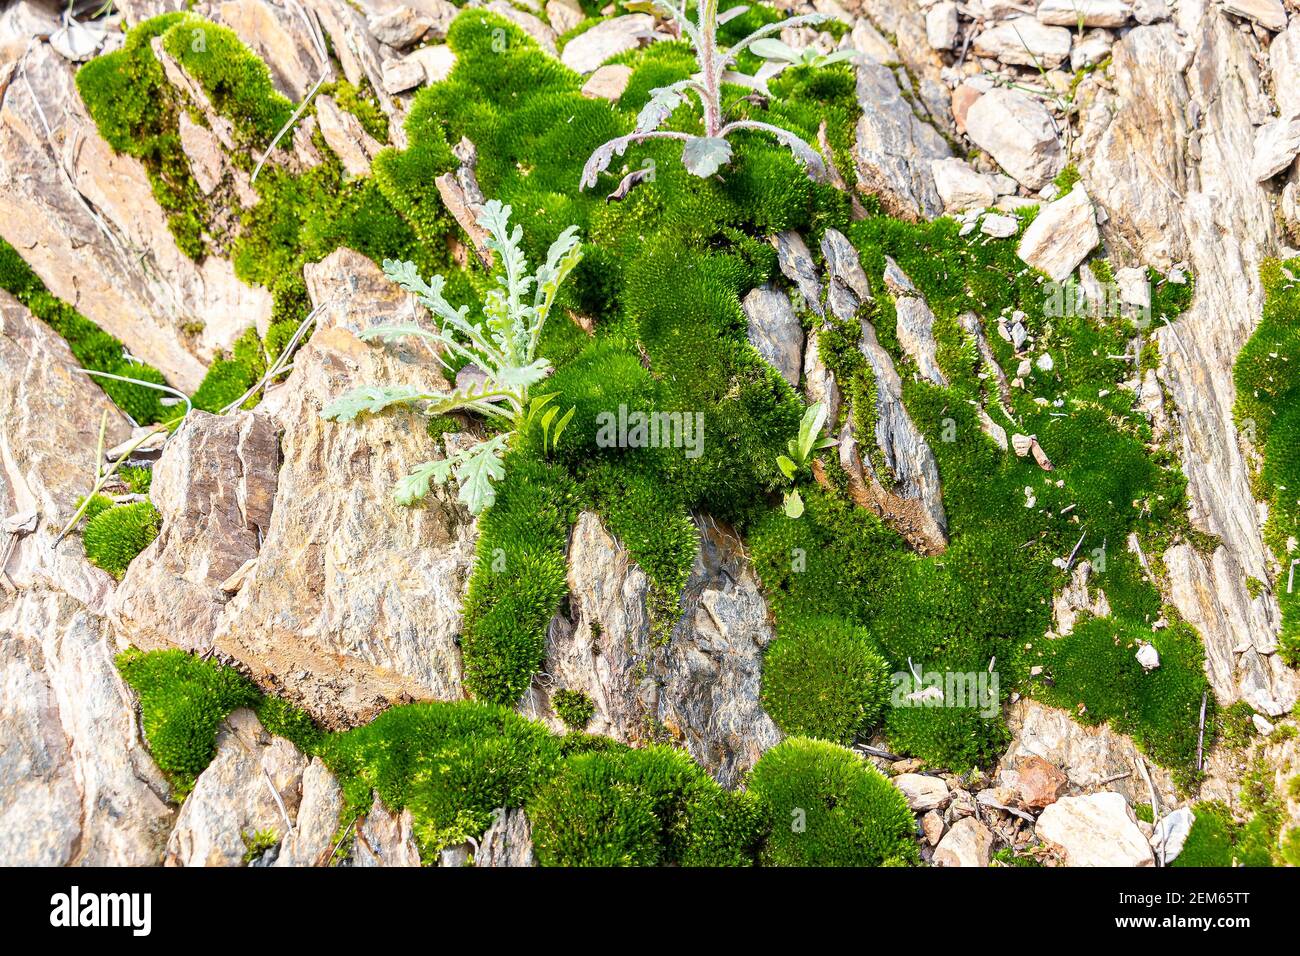 Beautiful Bright Green moss growing up in rough stones. Rocks full of the moss texture in nature Stock Photo